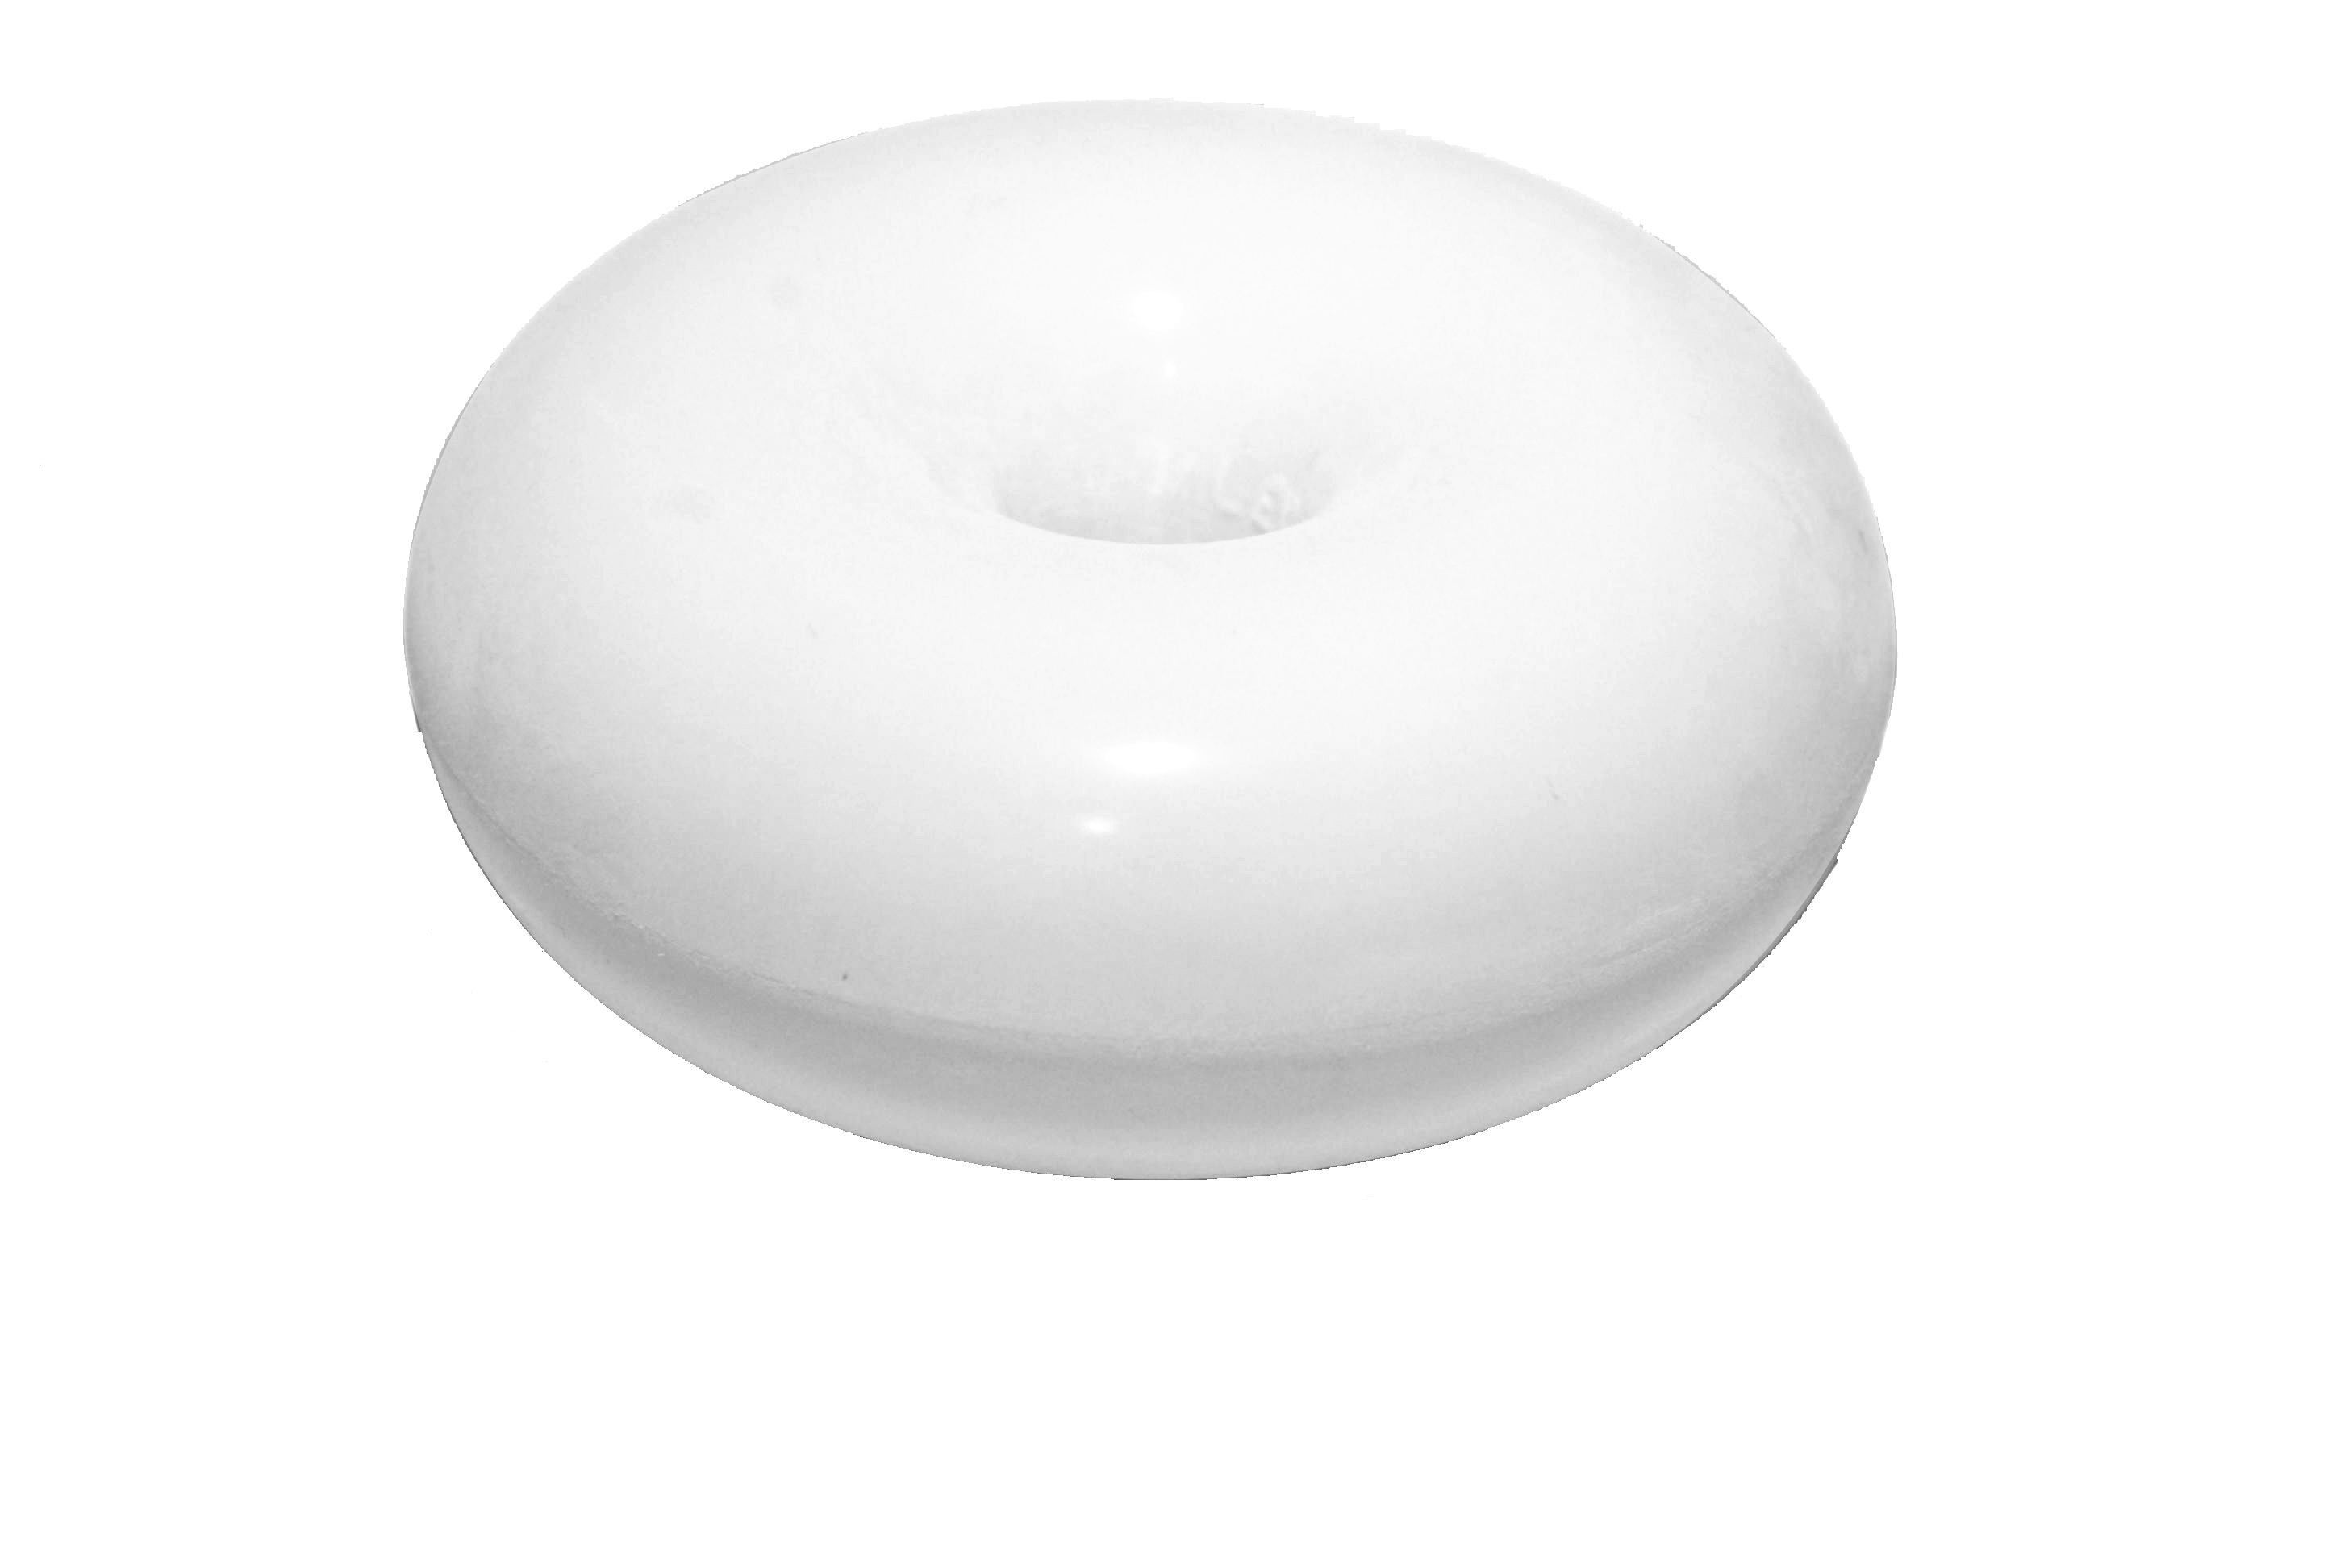 MedGyn Pessary Silicone Donut #3 2.7 inches or 69 mm